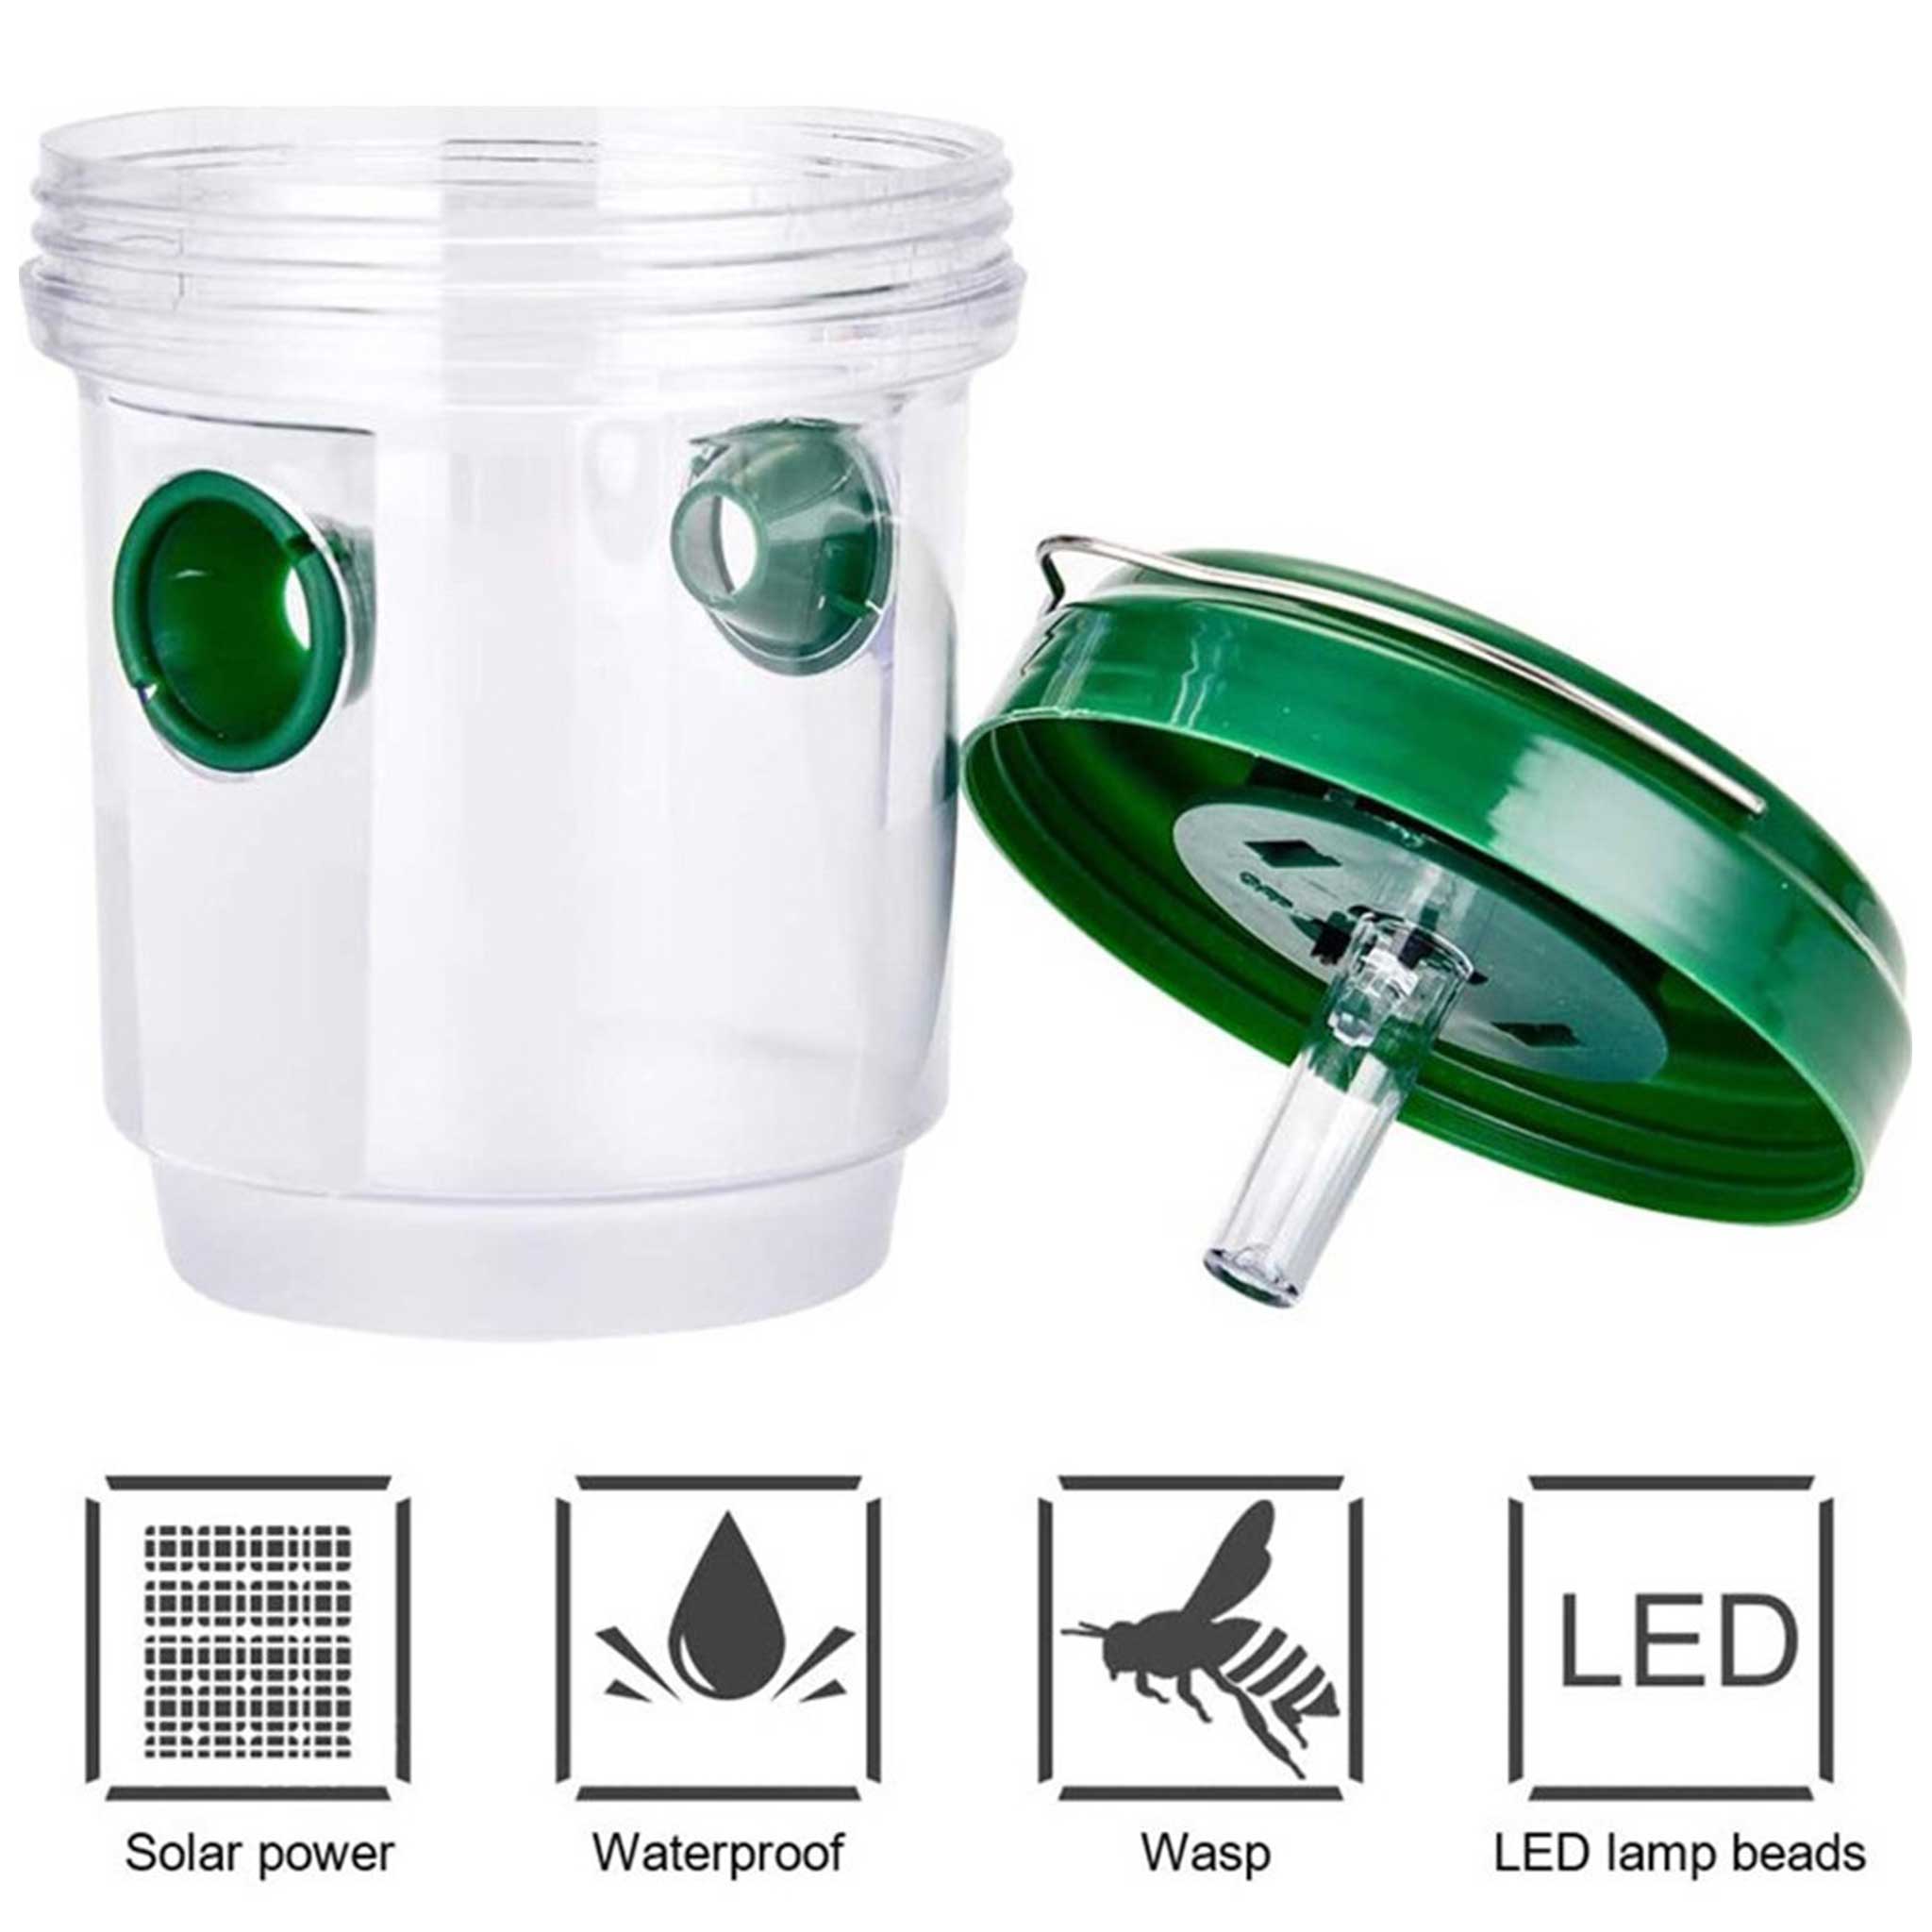 LED Solar Powered Wasp, Hornet and Small Hive Beetle Trap - Health collection by Buzzbee Beekeeping Supplies